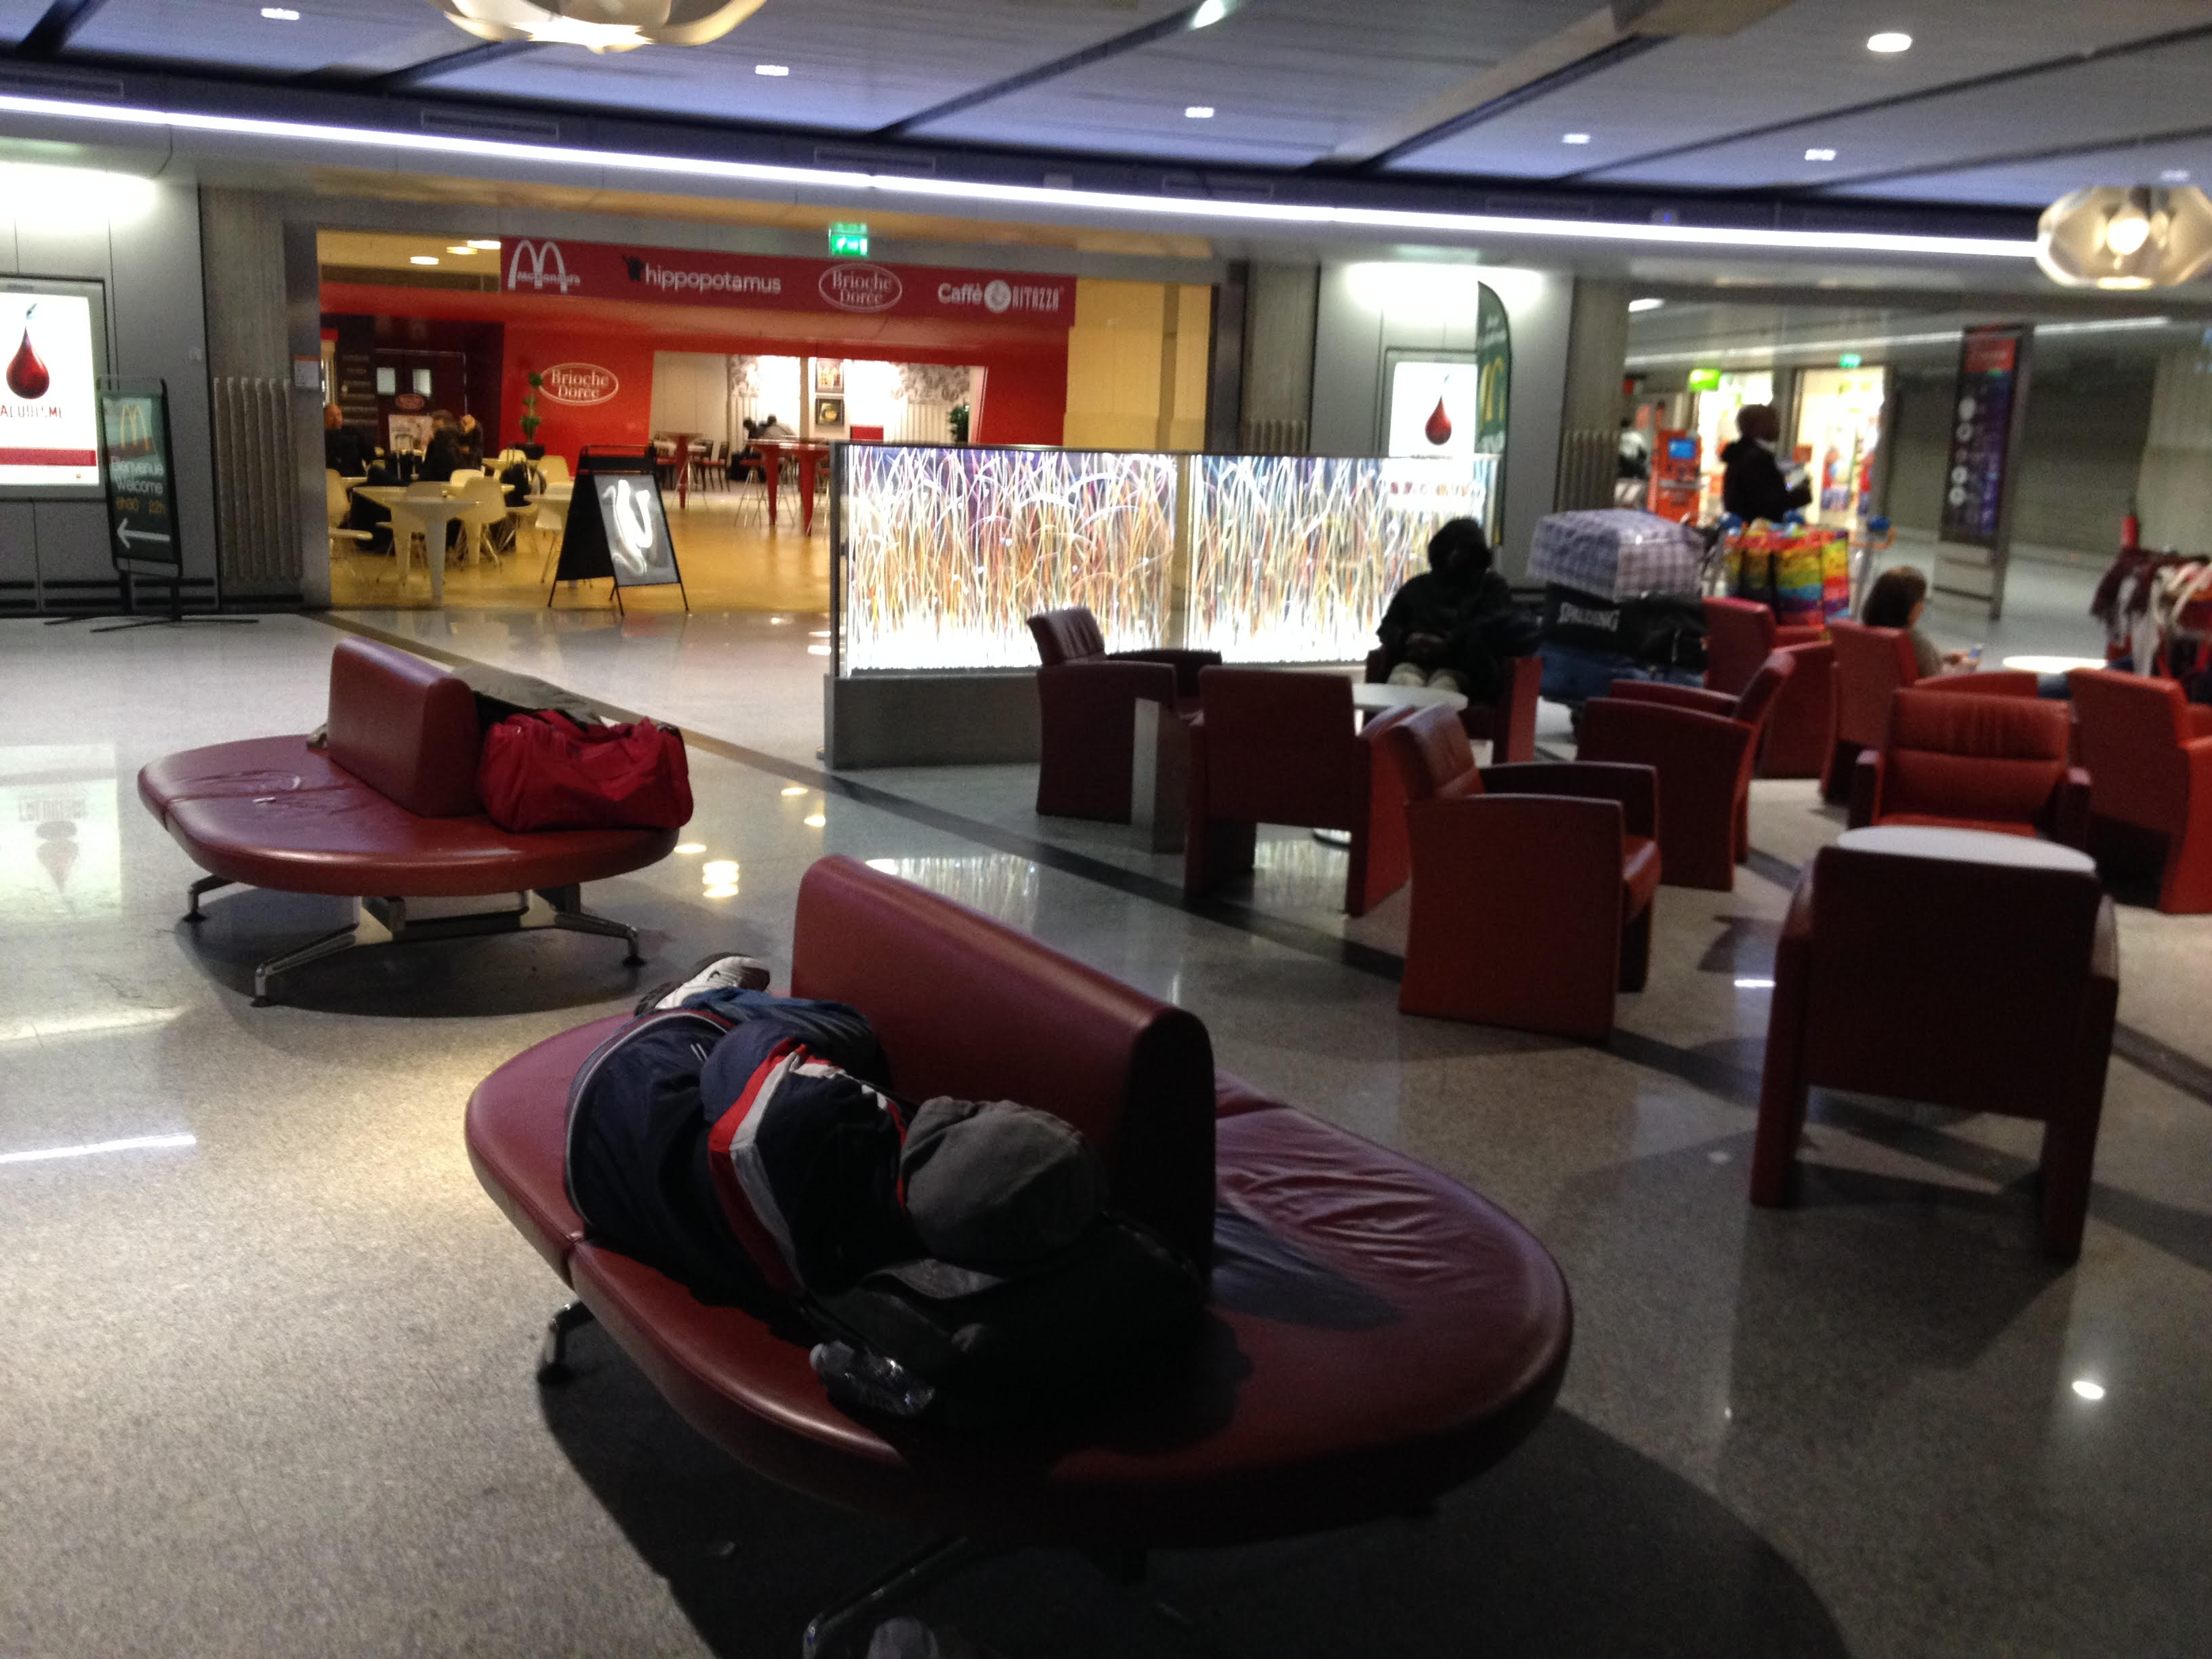 Everything To Know About Sleeping At Charles De Gaulle Airport - Skye  Travels